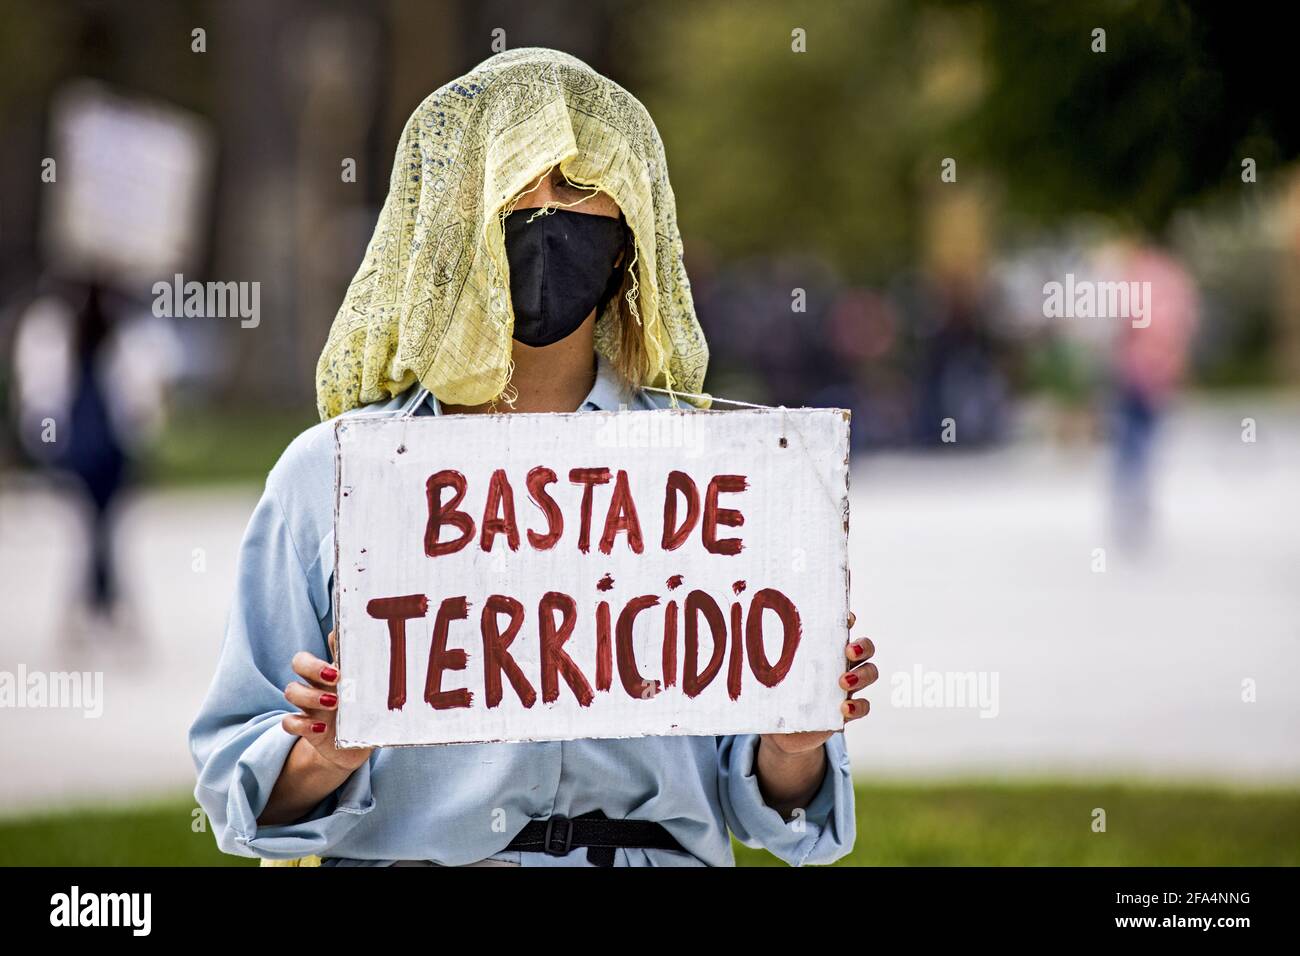 Buenos Aires, Federal Capital, Argentina. 22nd Apr, 2021. A mobilization took place in the city of Buenos Aires, in the vicinity of the government house, in celebration of the International Mother Earth Day, calling to reflect on our commitment to care for the planet. Credit: Roberto Almeida Aveledo/ZUMA Wire/Alamy Live News Stock Photo